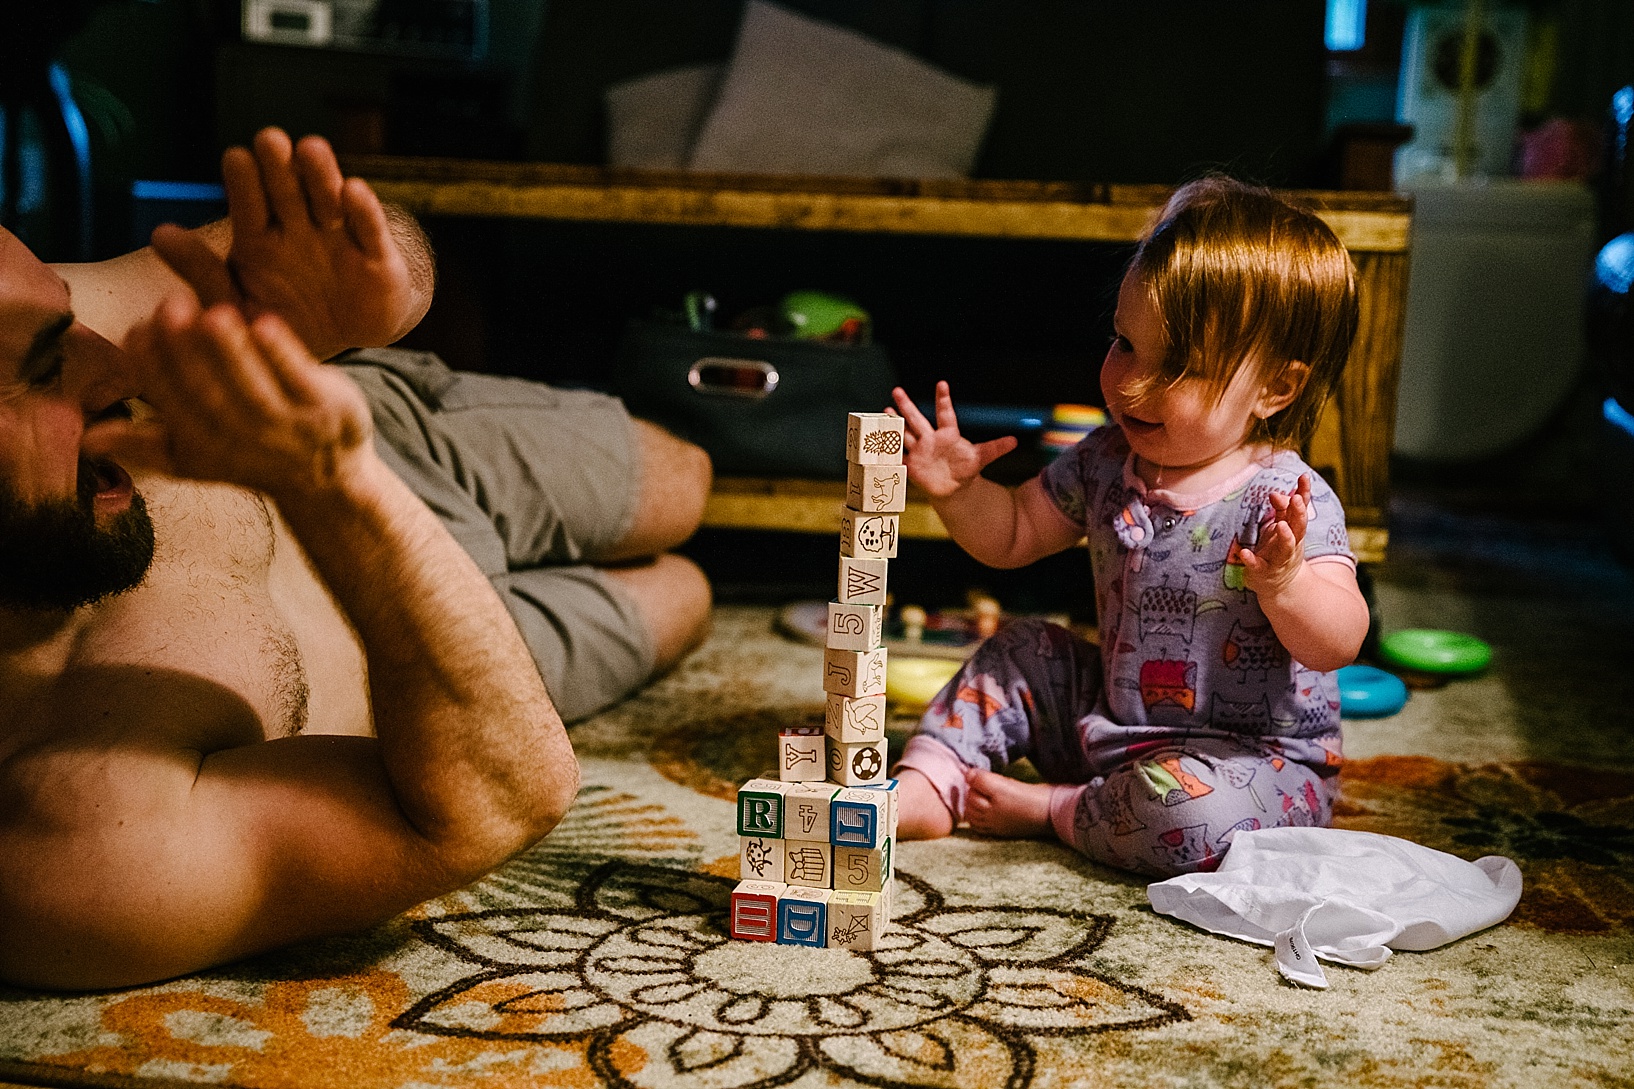 toddler building block tower and dad clapping